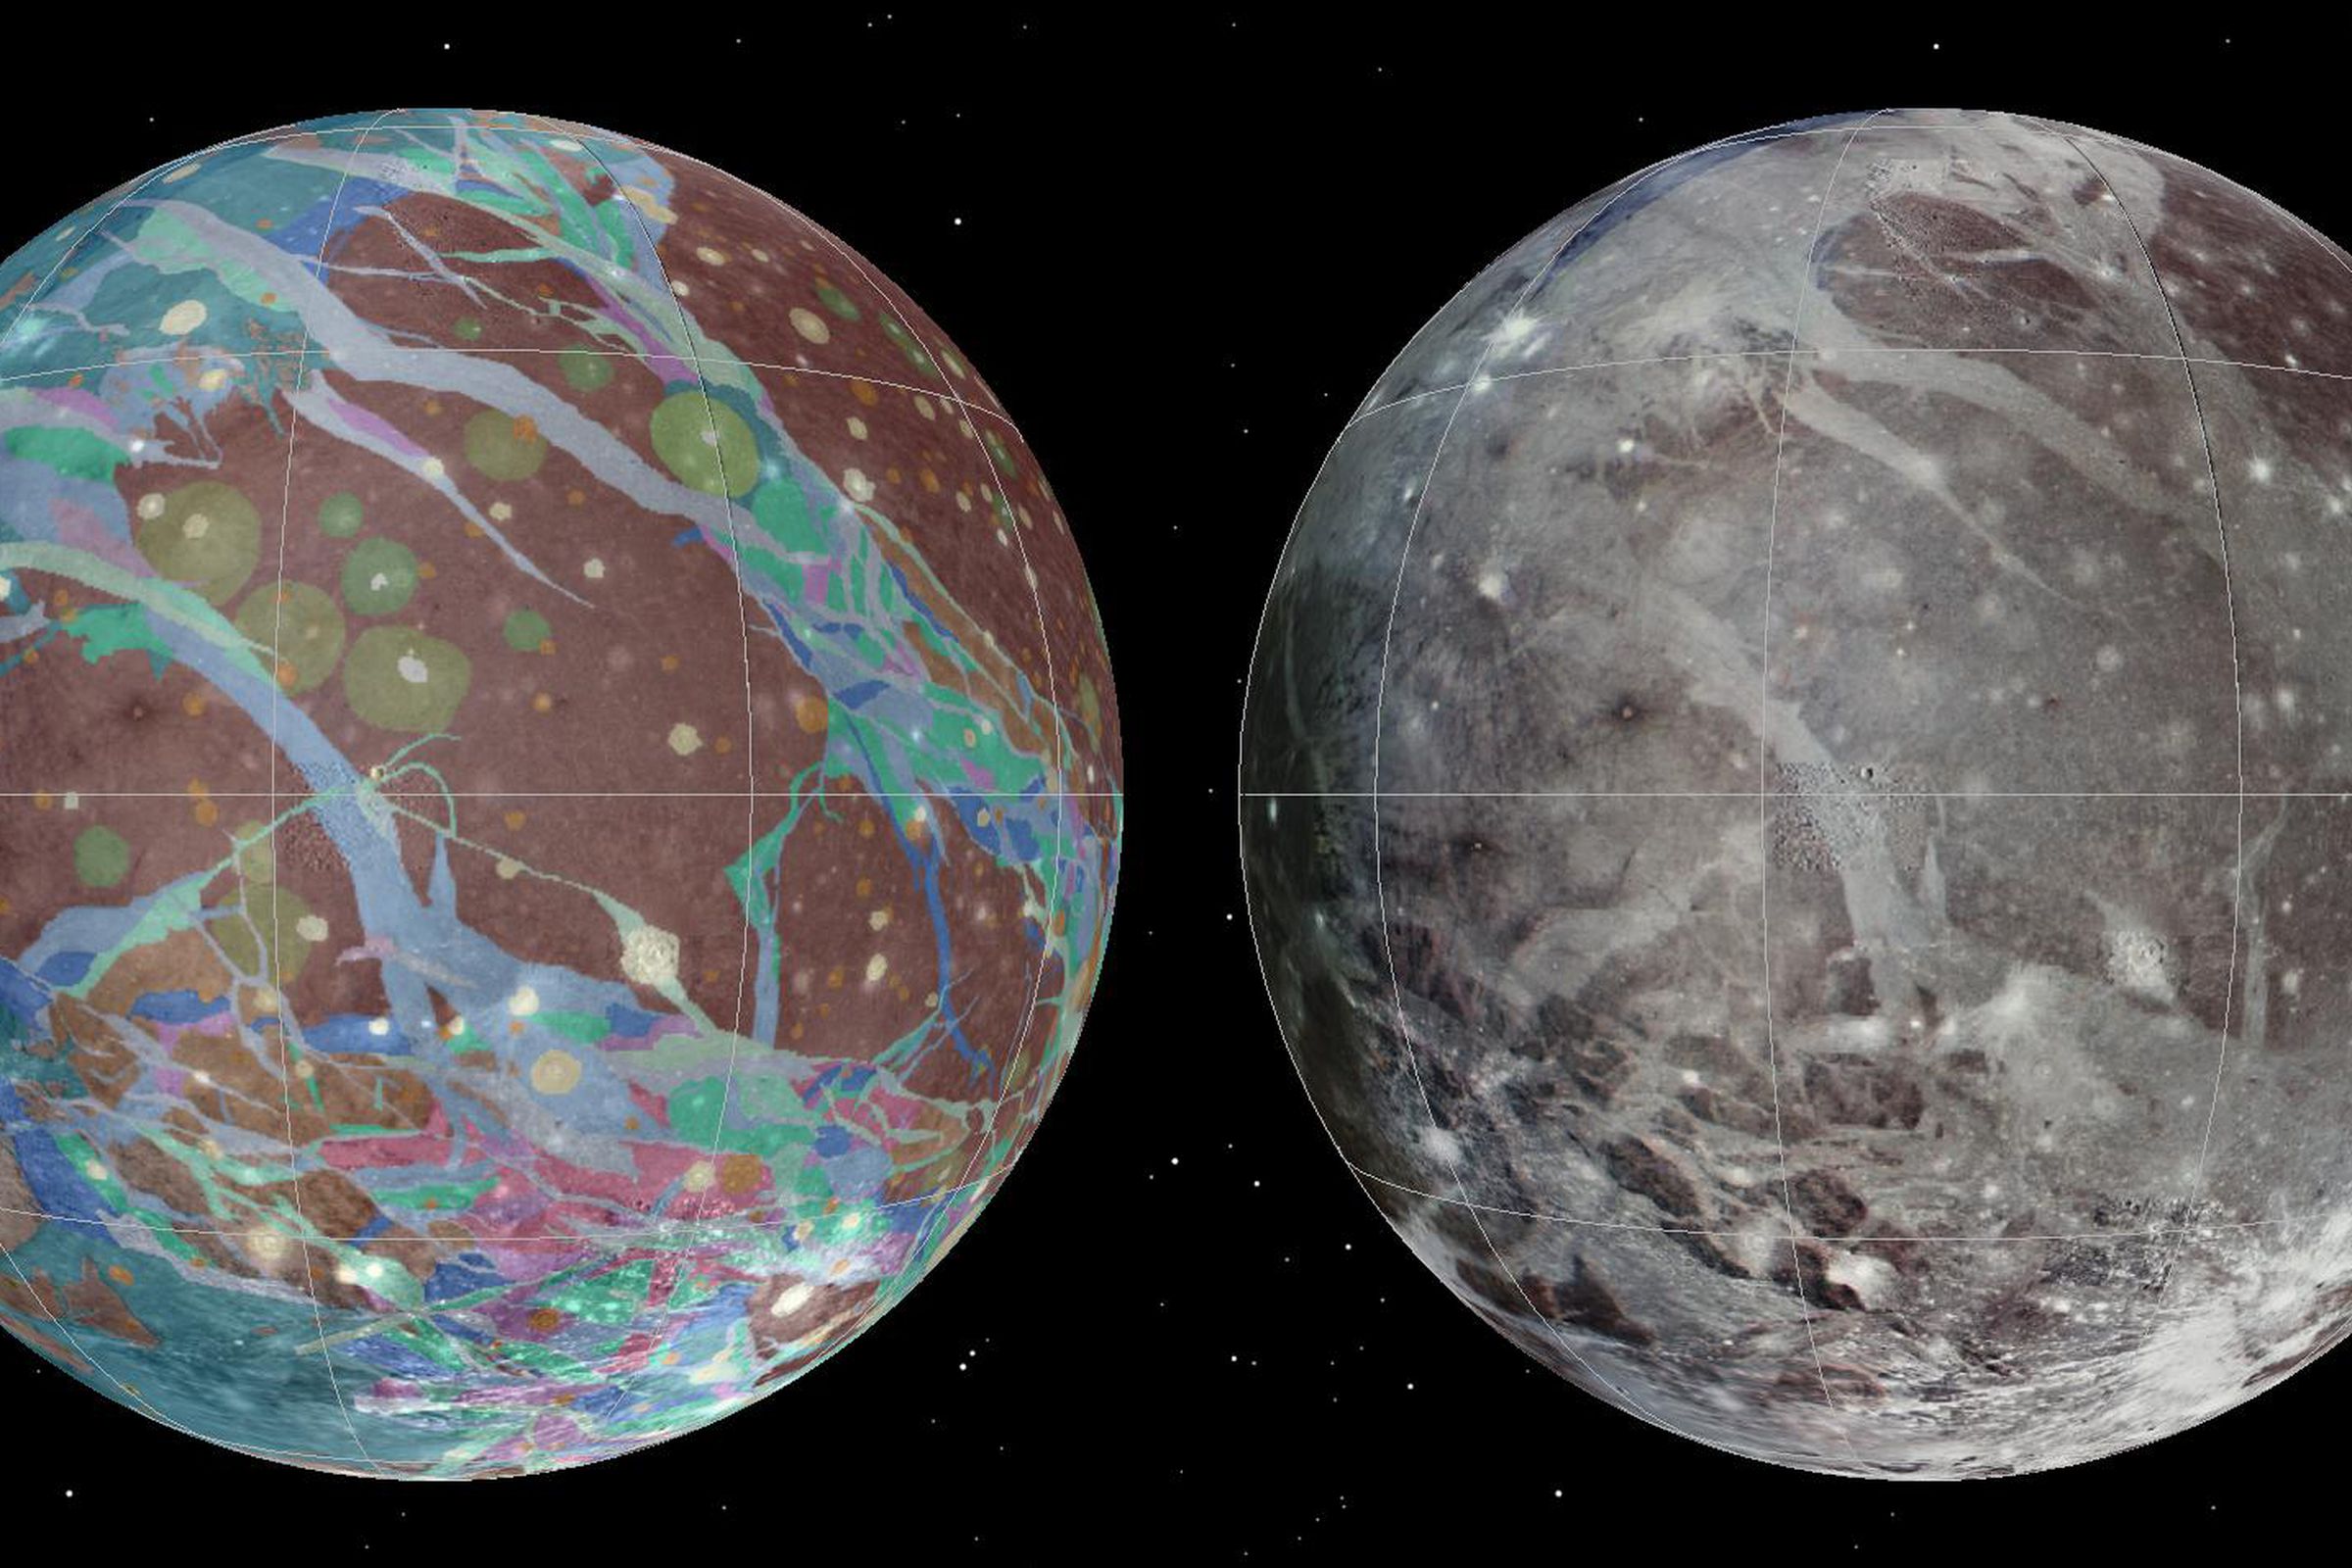 These images of Ganymede were constructed from imagery from NASA’s Voyager 1 and 2 and Galileo spacecraft